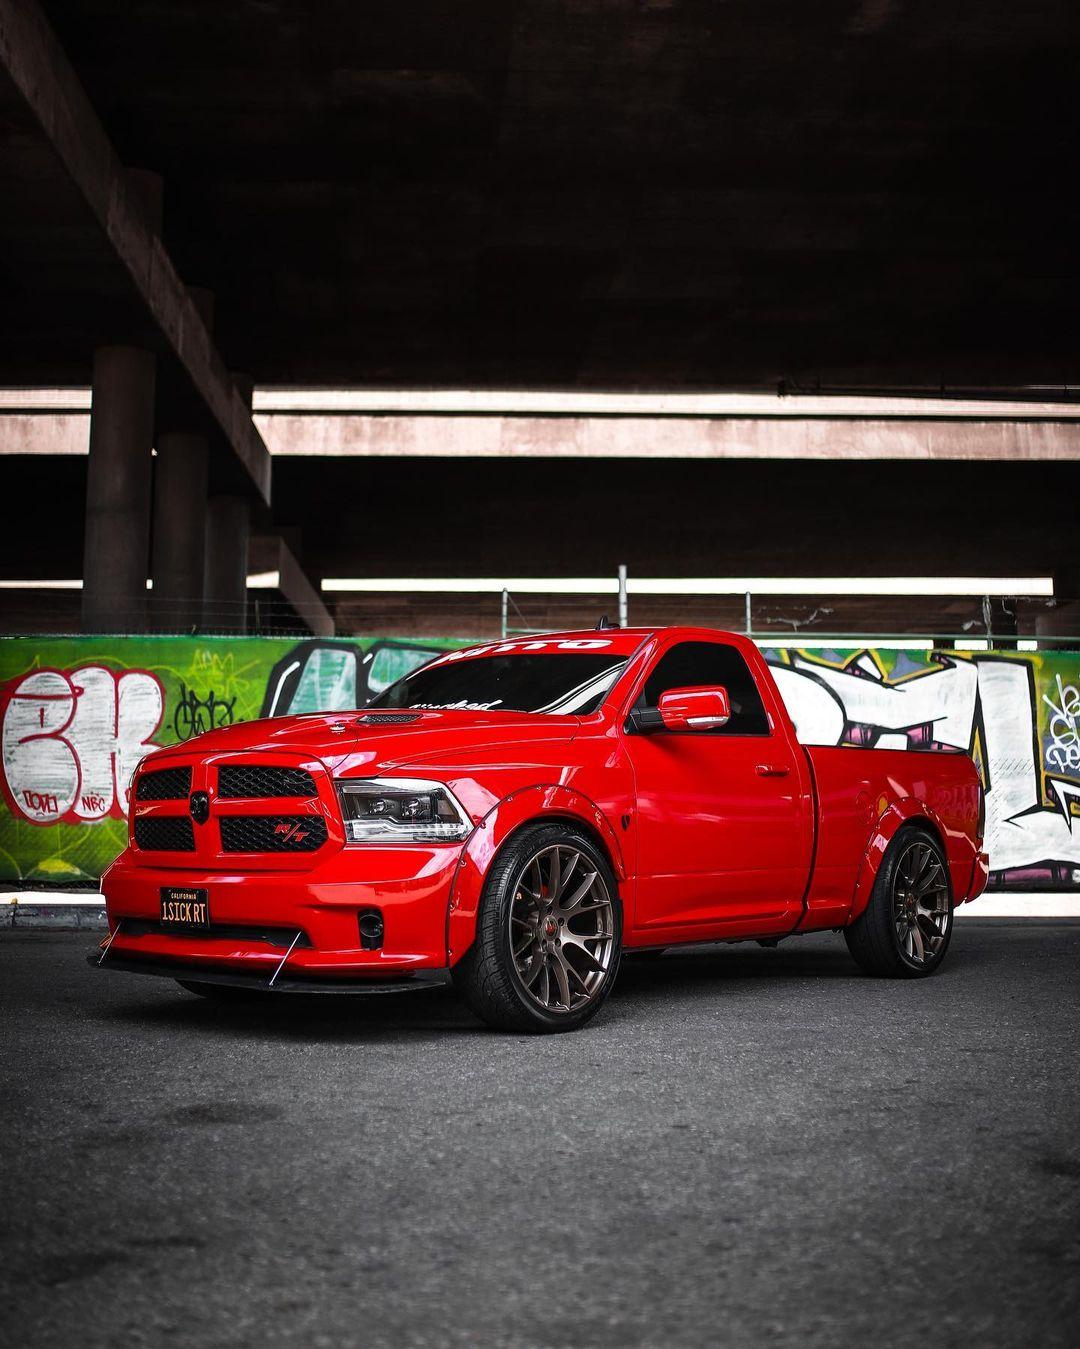 Ram R T Single Cab With Widebody And Huge Wheels Looks Like A Ford